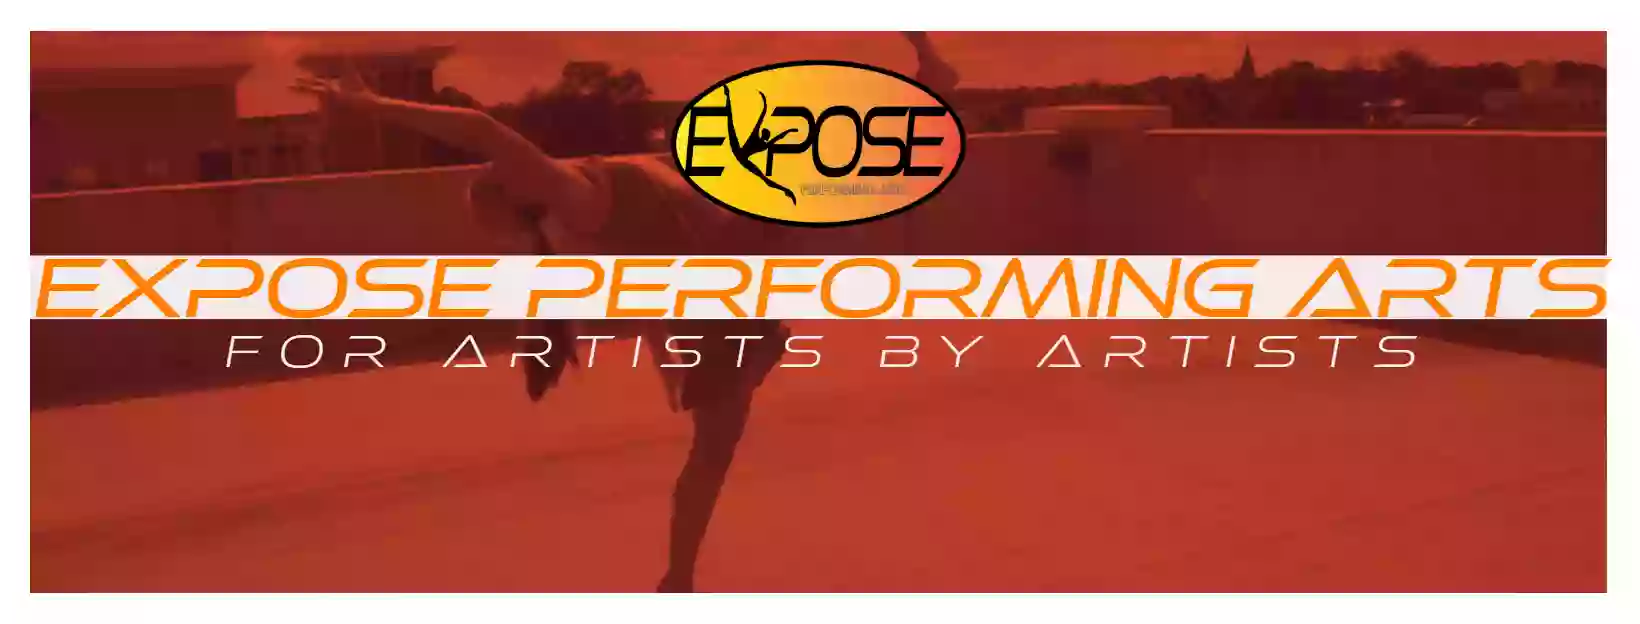 Expose Performing Arts